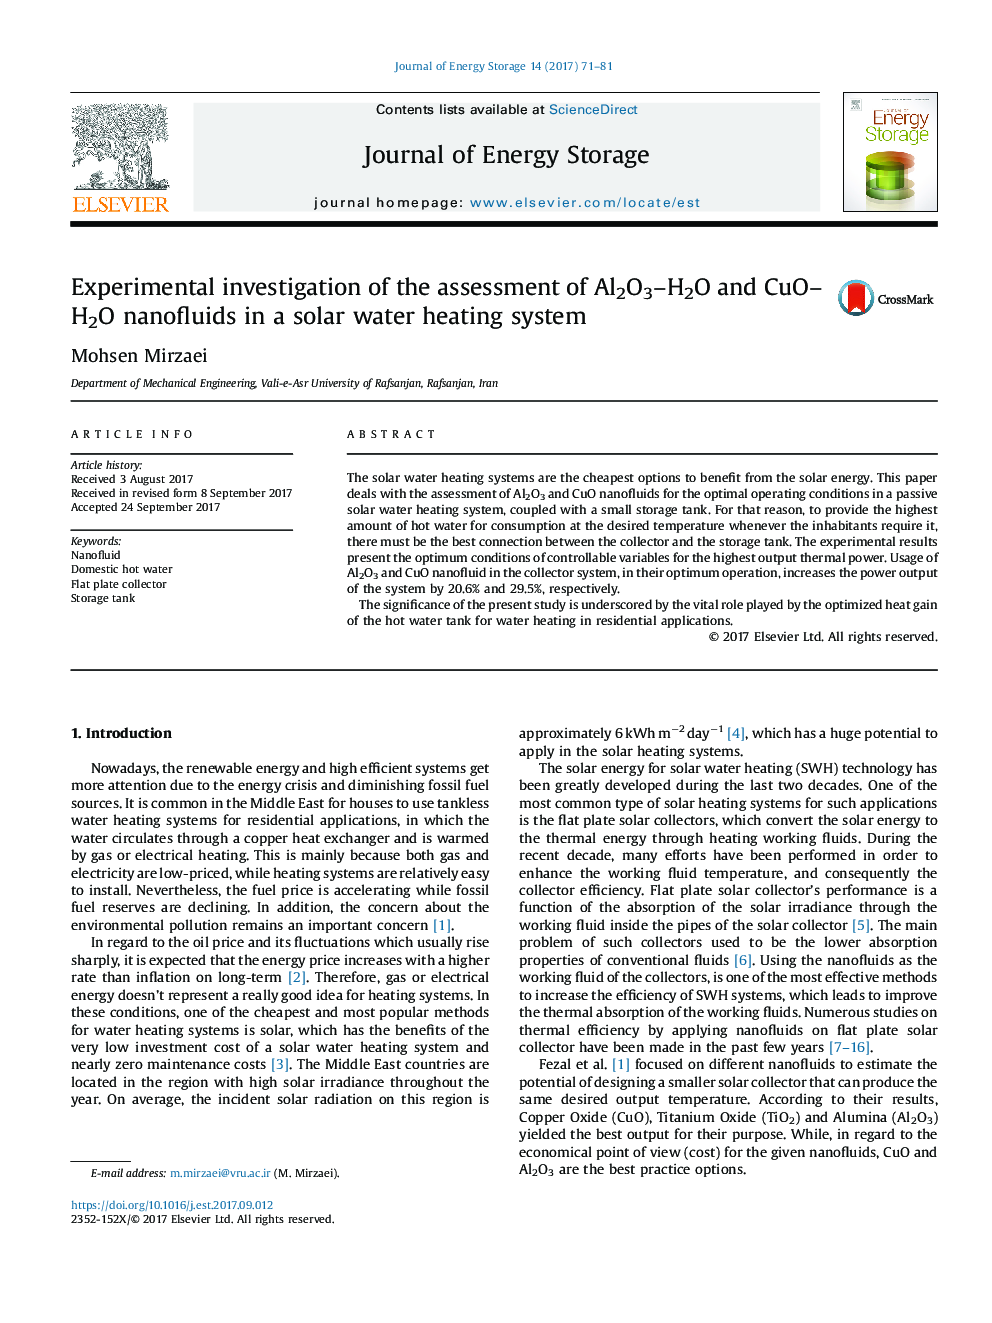 Experimental investigation of the assessment of Al2O3-H2O and CuO-H2O nanofluids in a solar water heating system